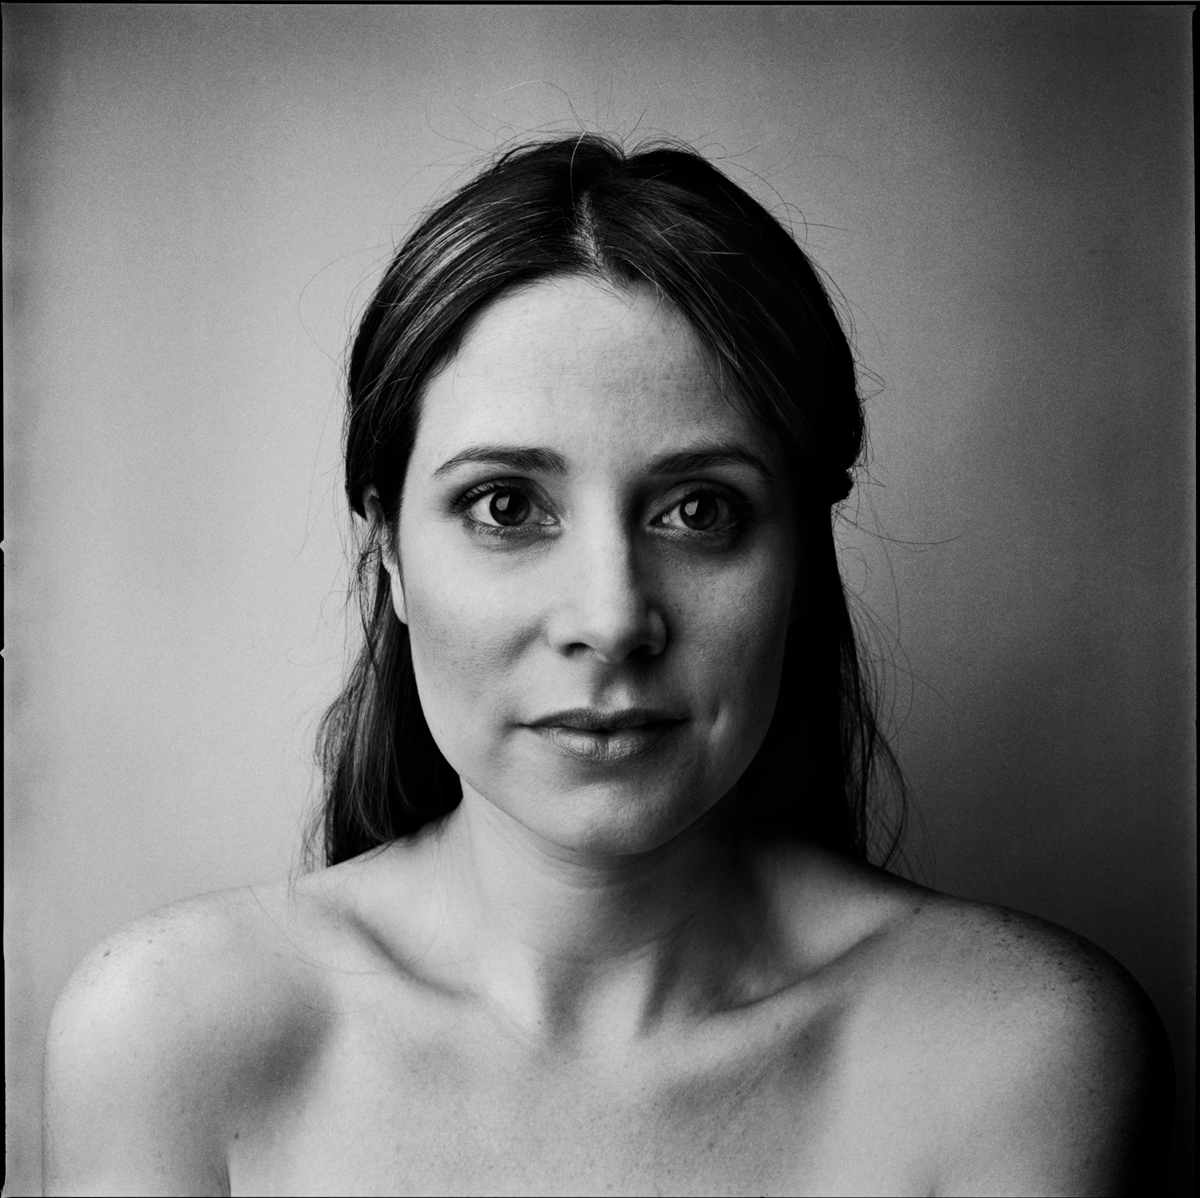 photo art girl woman Eating disorder beauty social issue portrait fine art black and white interview series Hasselblad film photography